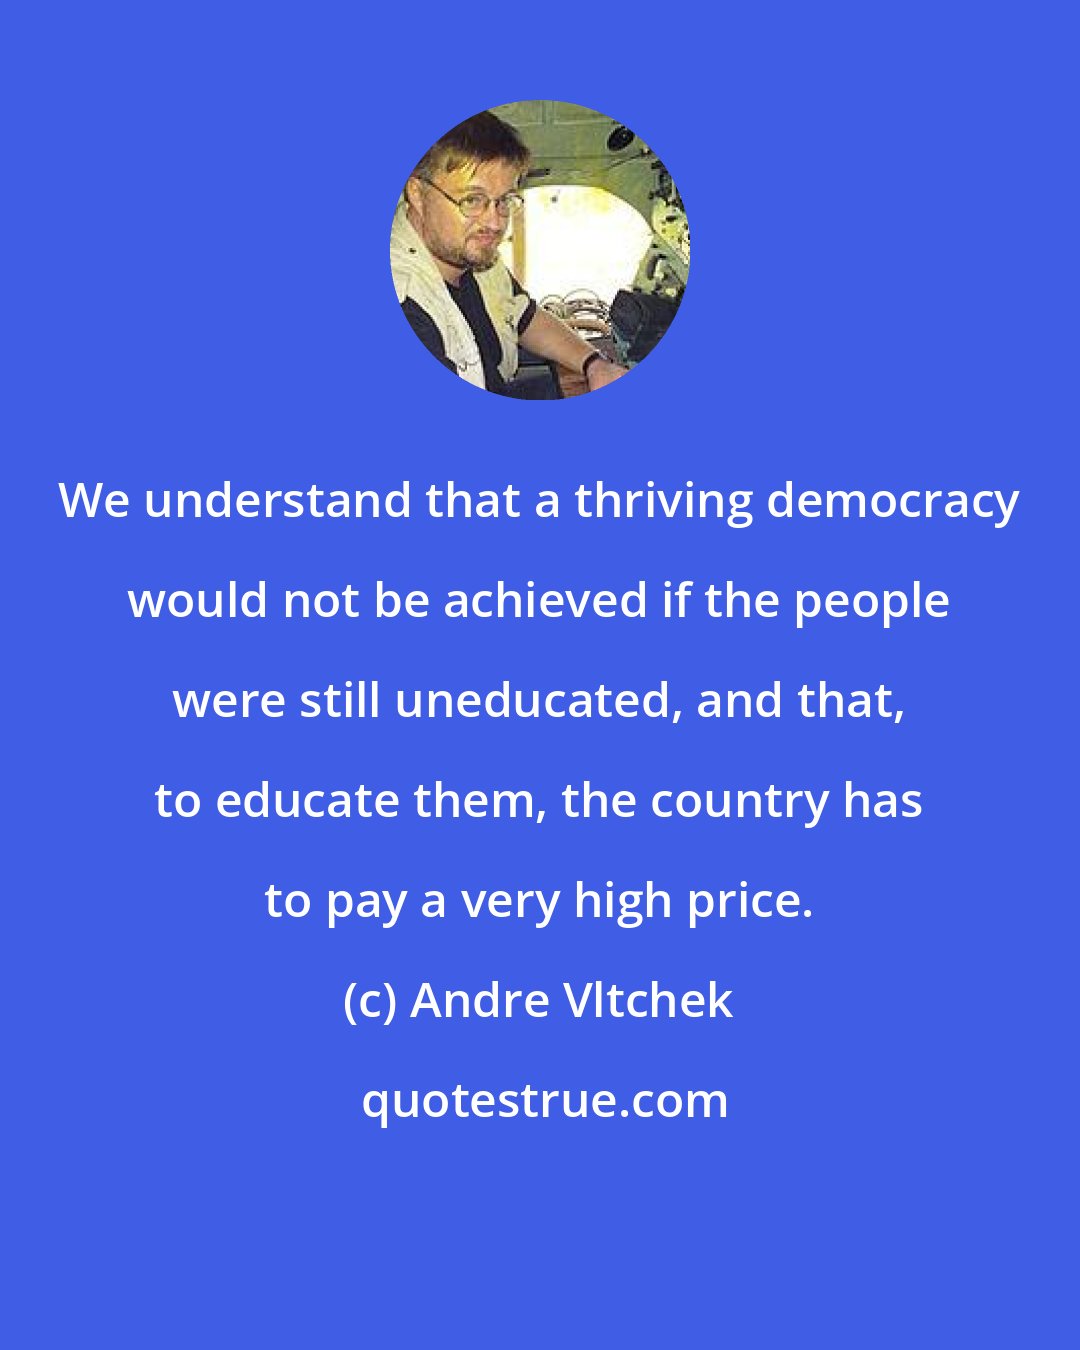 Andre Vltchek: We understand that a thriving democracy would not be achieved if the people were still uneducated, and that, to educate them, the country has to pay a very high price.